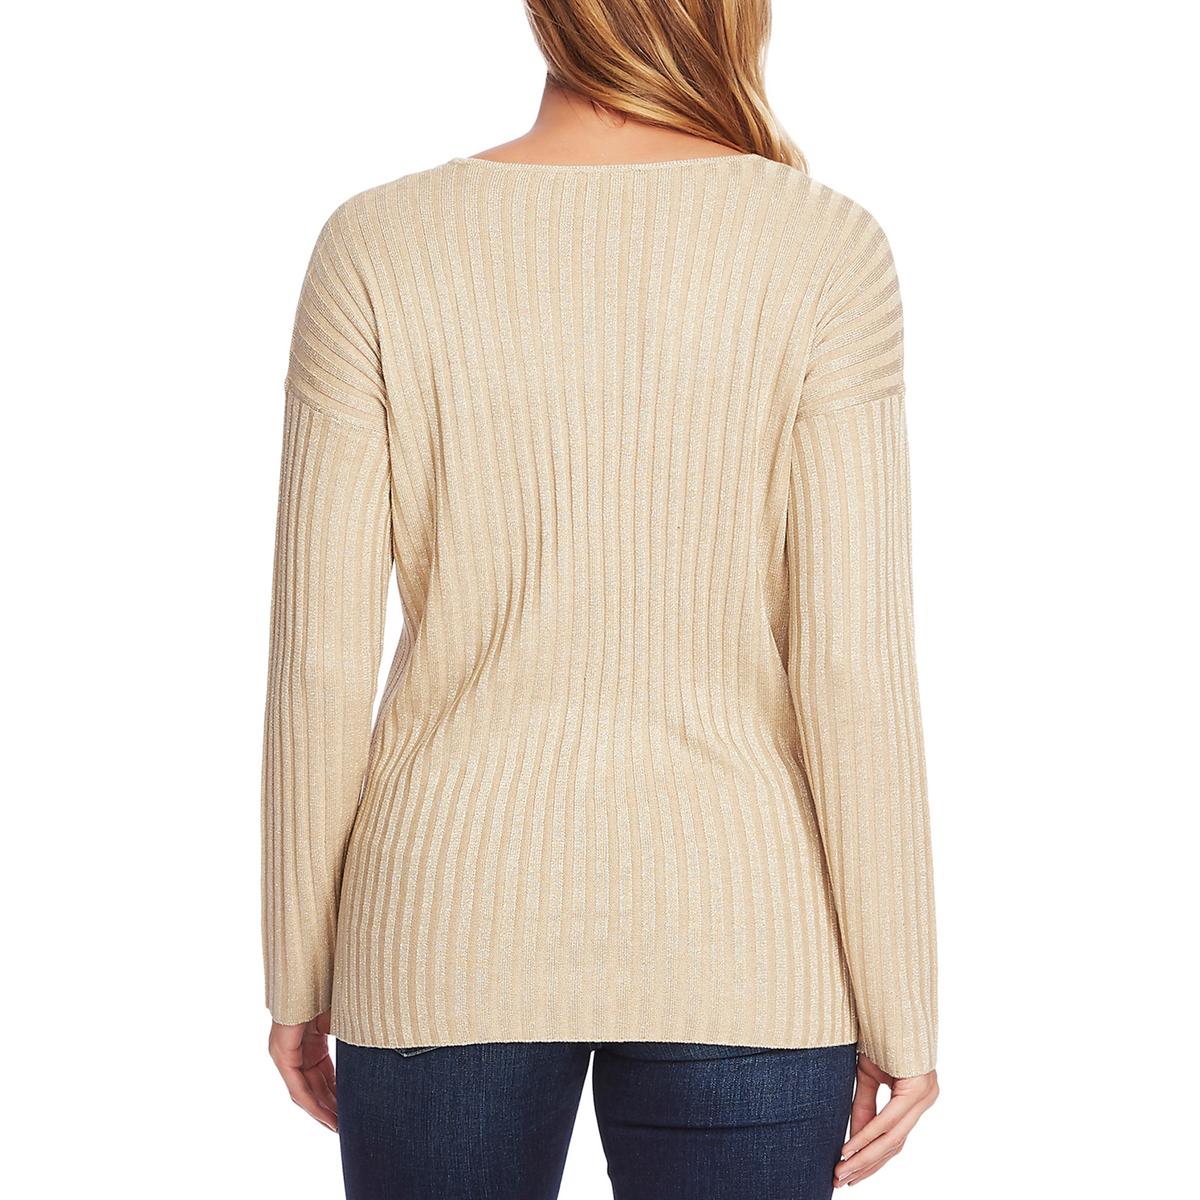 Vince Camuto Womens Ribbed Metallic Sweater